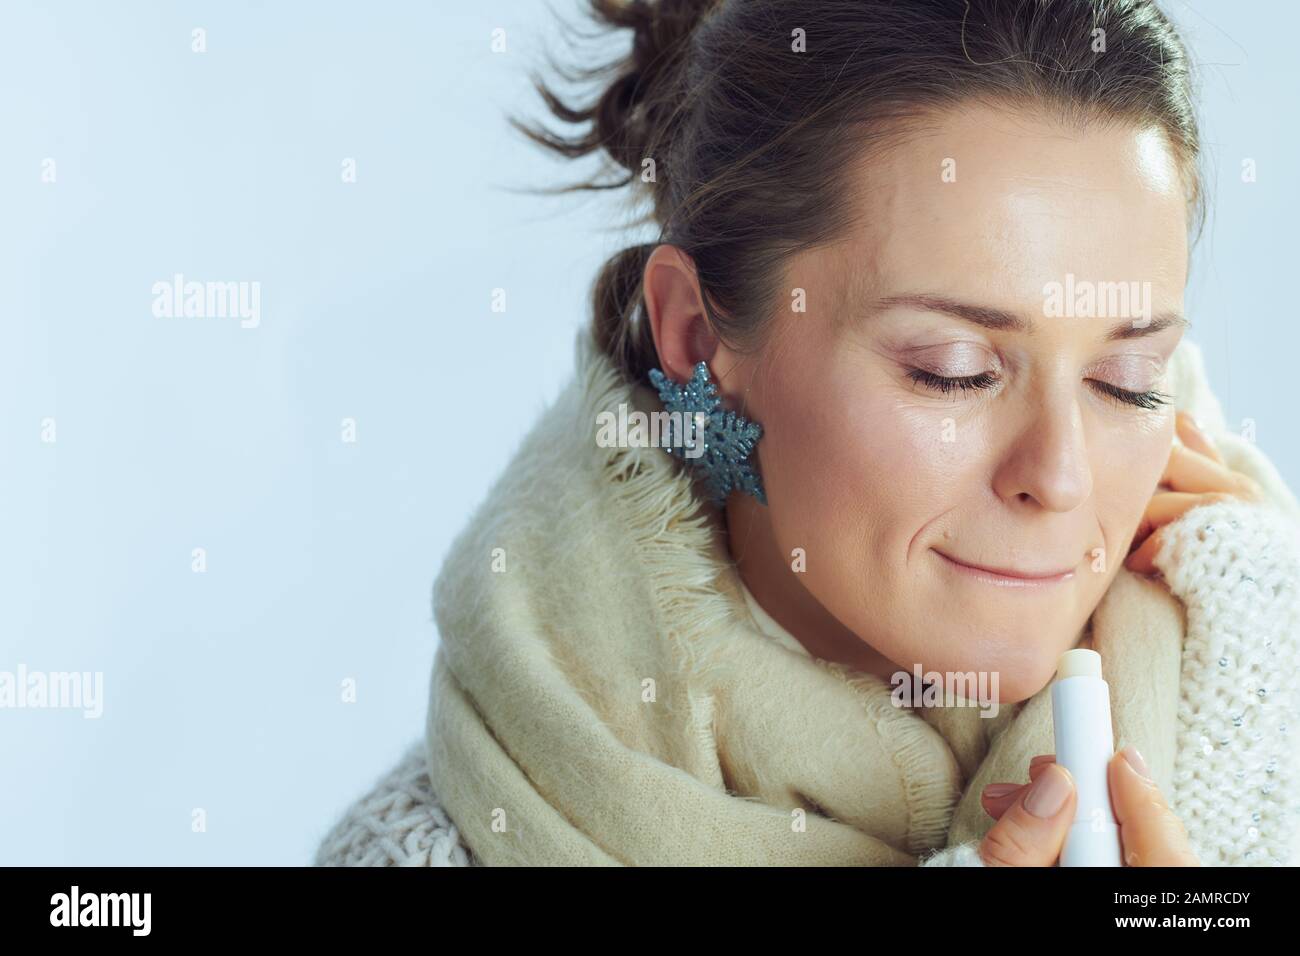 stylish 40 years old housewife in roll neck sweater and cardigan using lip balm as winter lip care against winter light blue background. Stock Photo